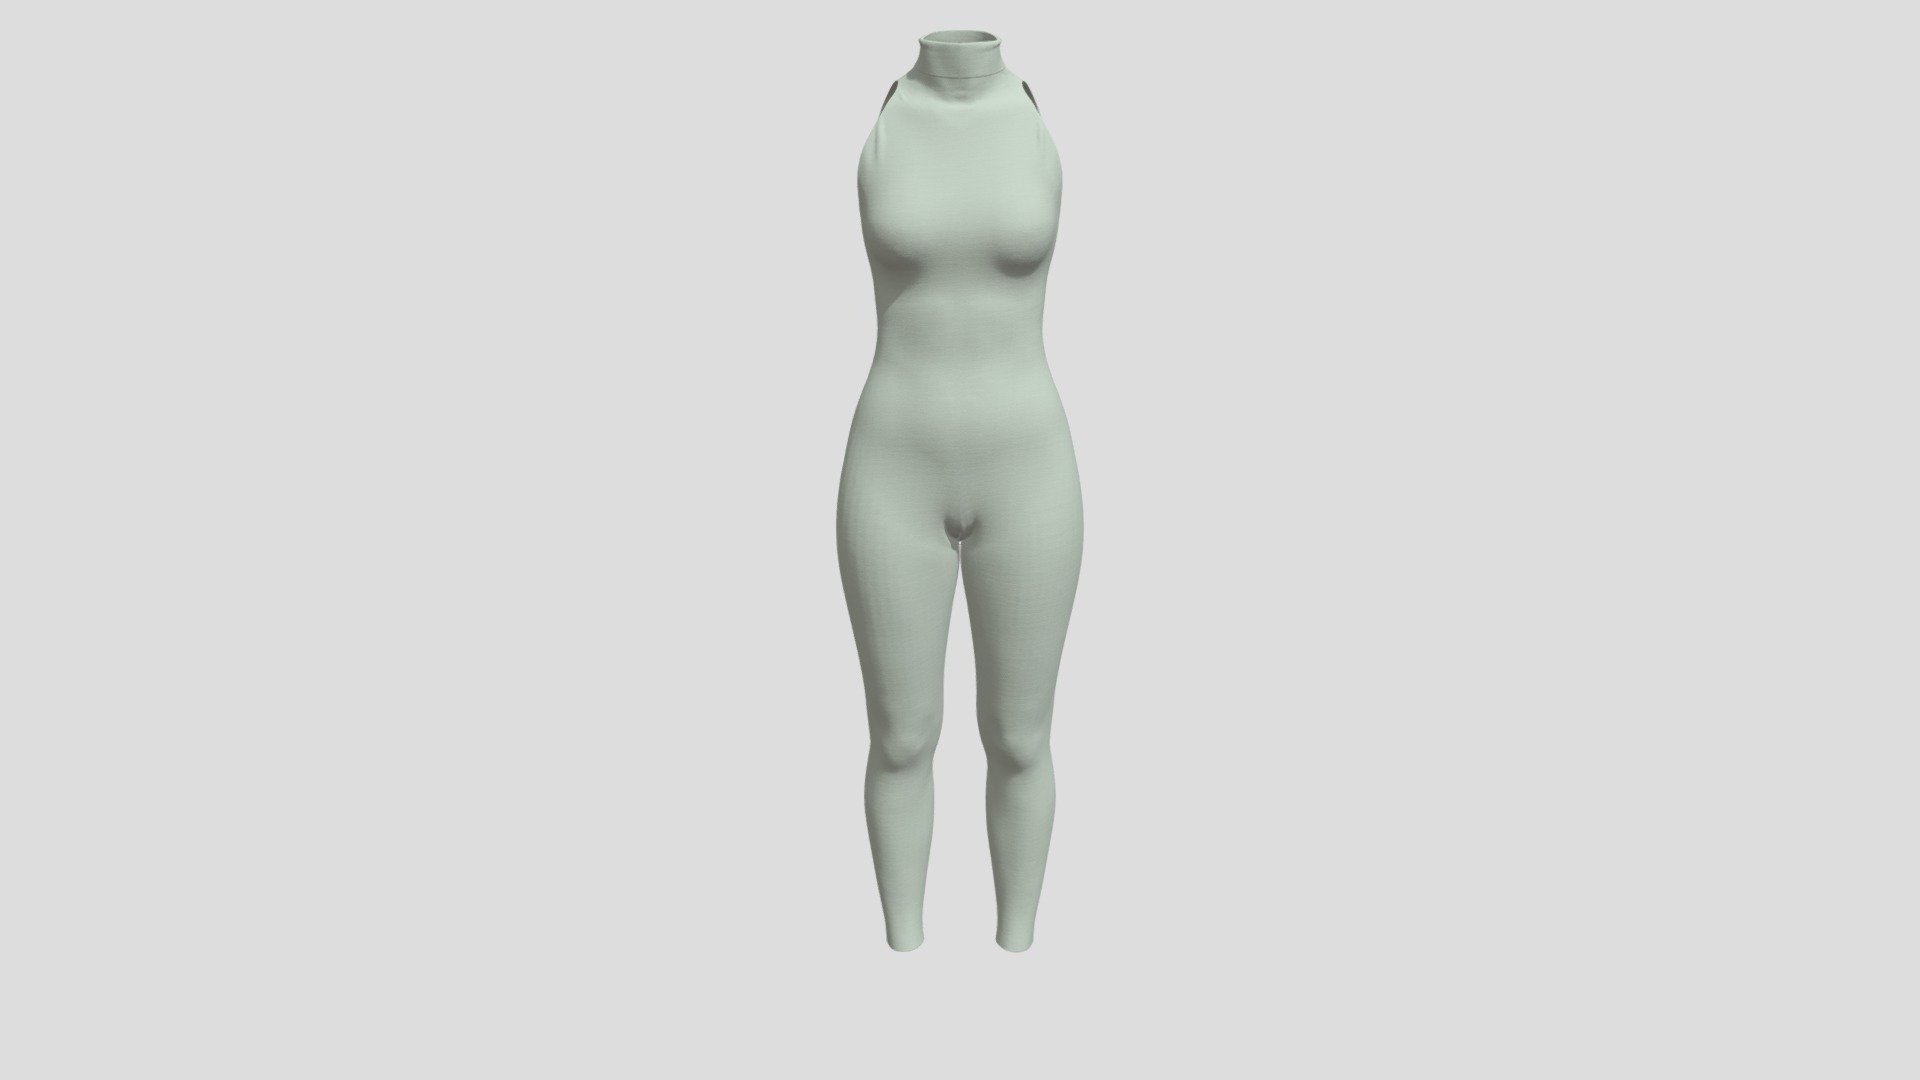 Attachment include native .zprj file, fbx files, obj file, and models with avatar/figure 3d model